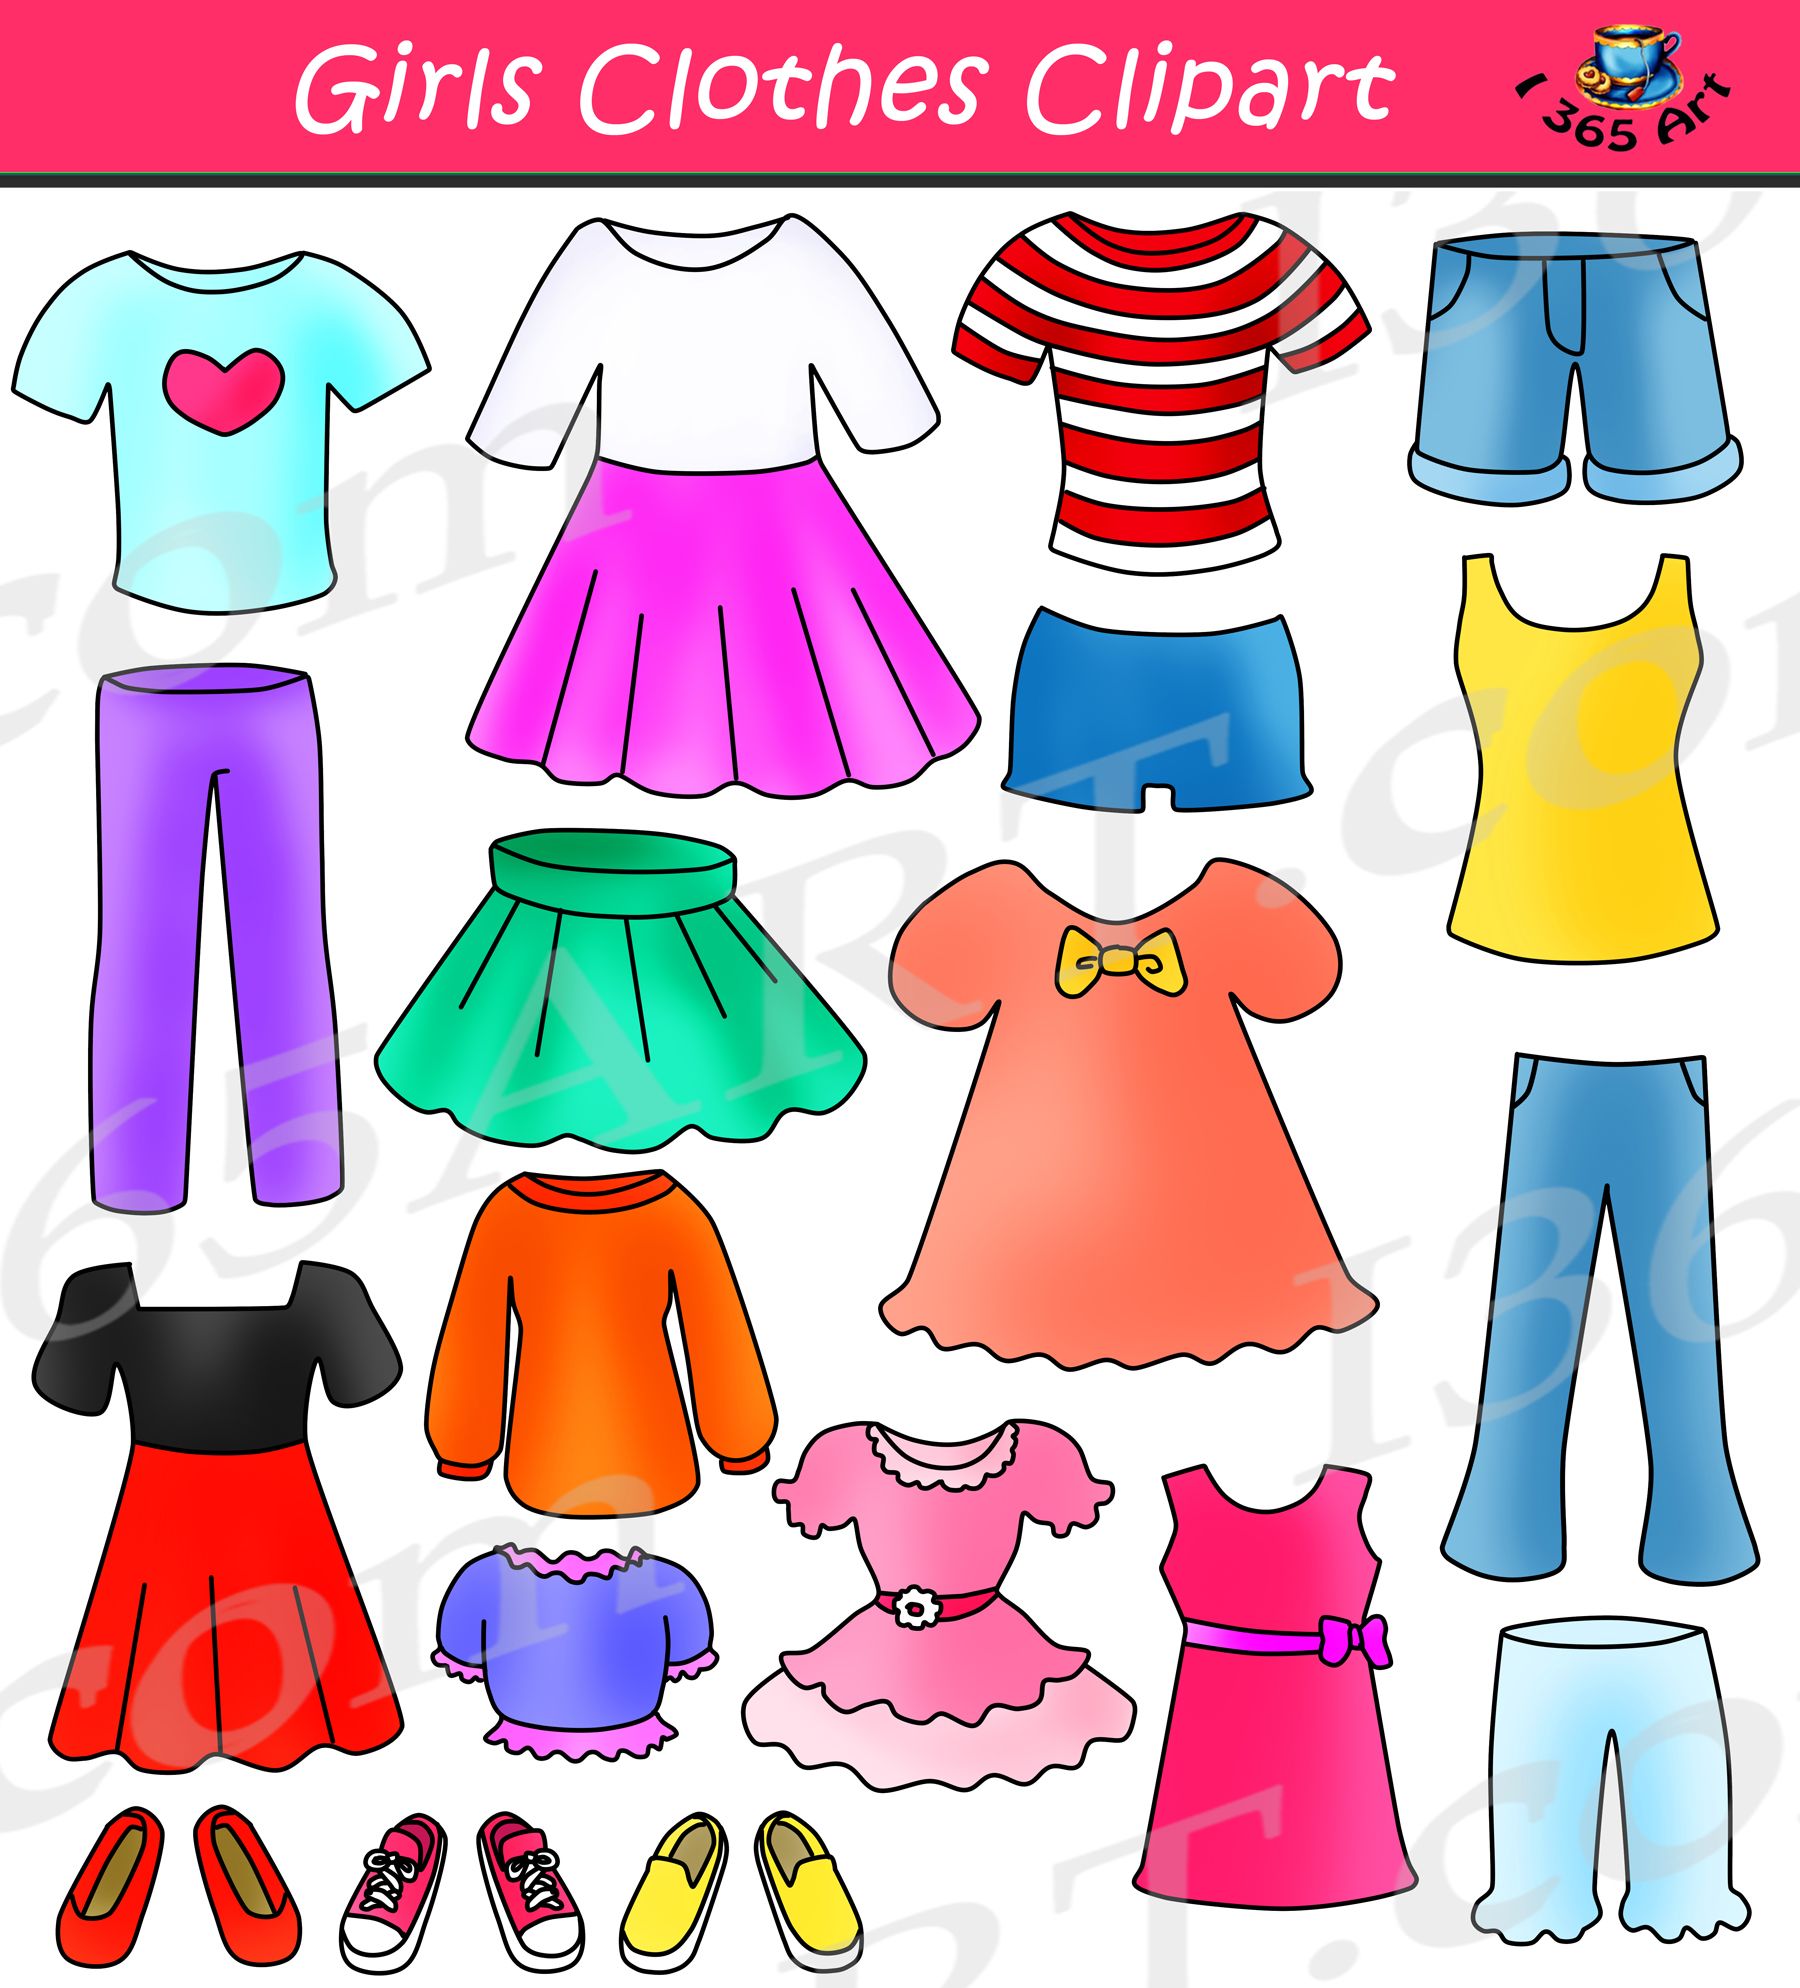 Girls clothes clipart.